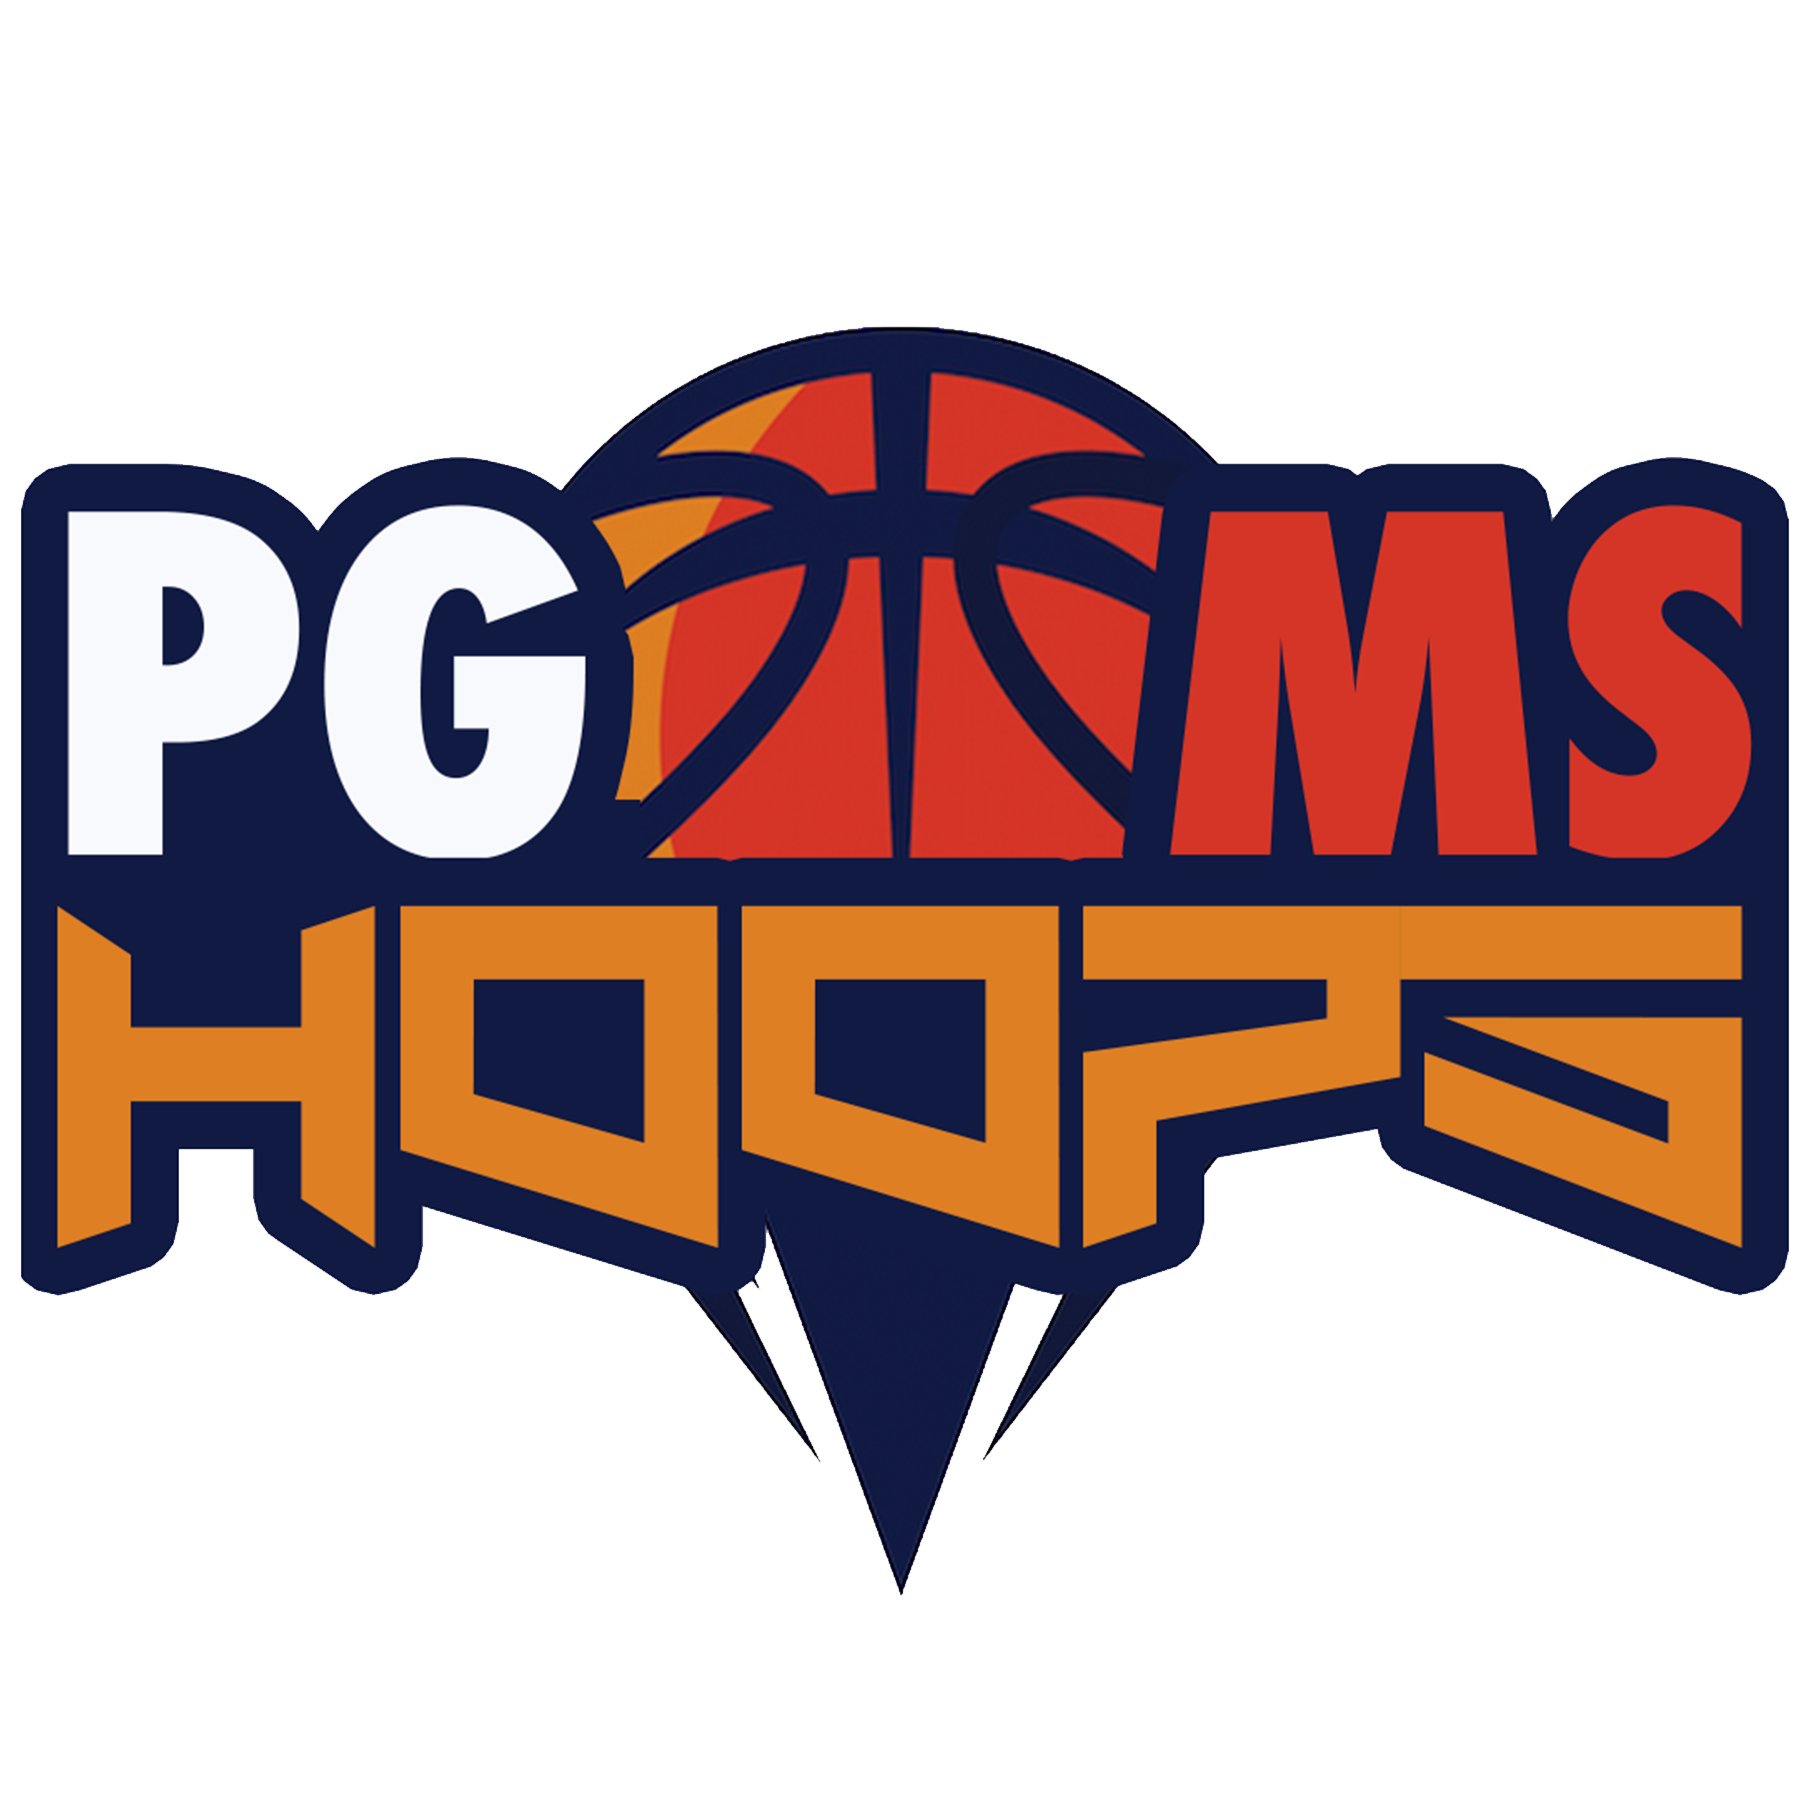 Covering PG Middle School Basketball
pgmshoops@gmail.com